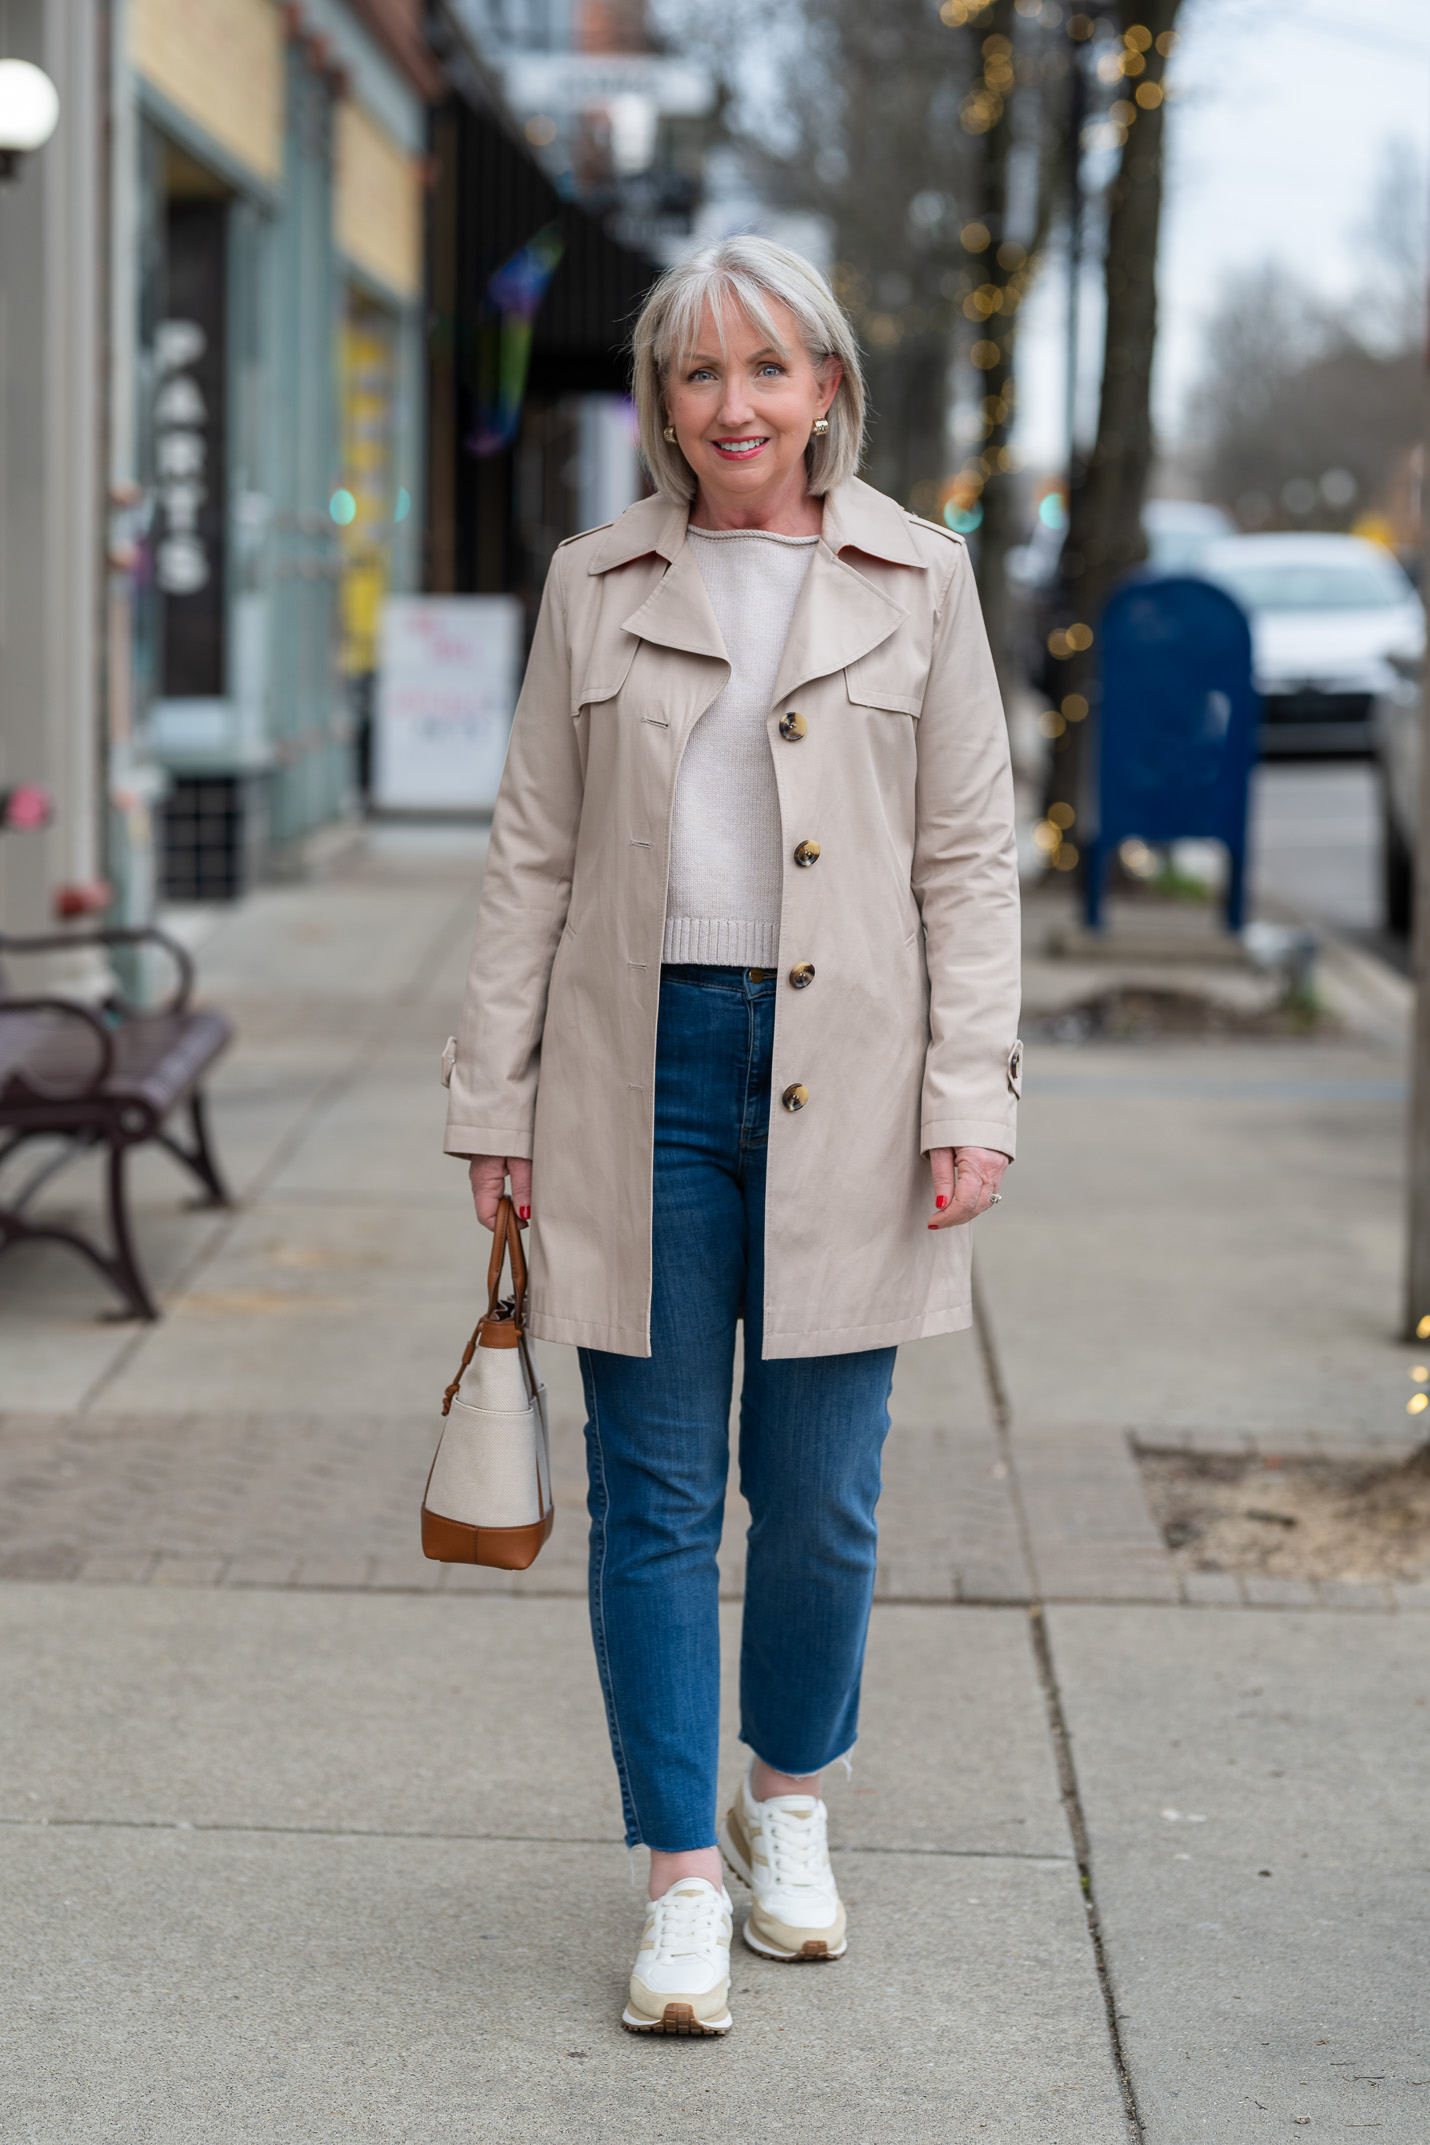 Elevated Jeans Outfit for Early Spring